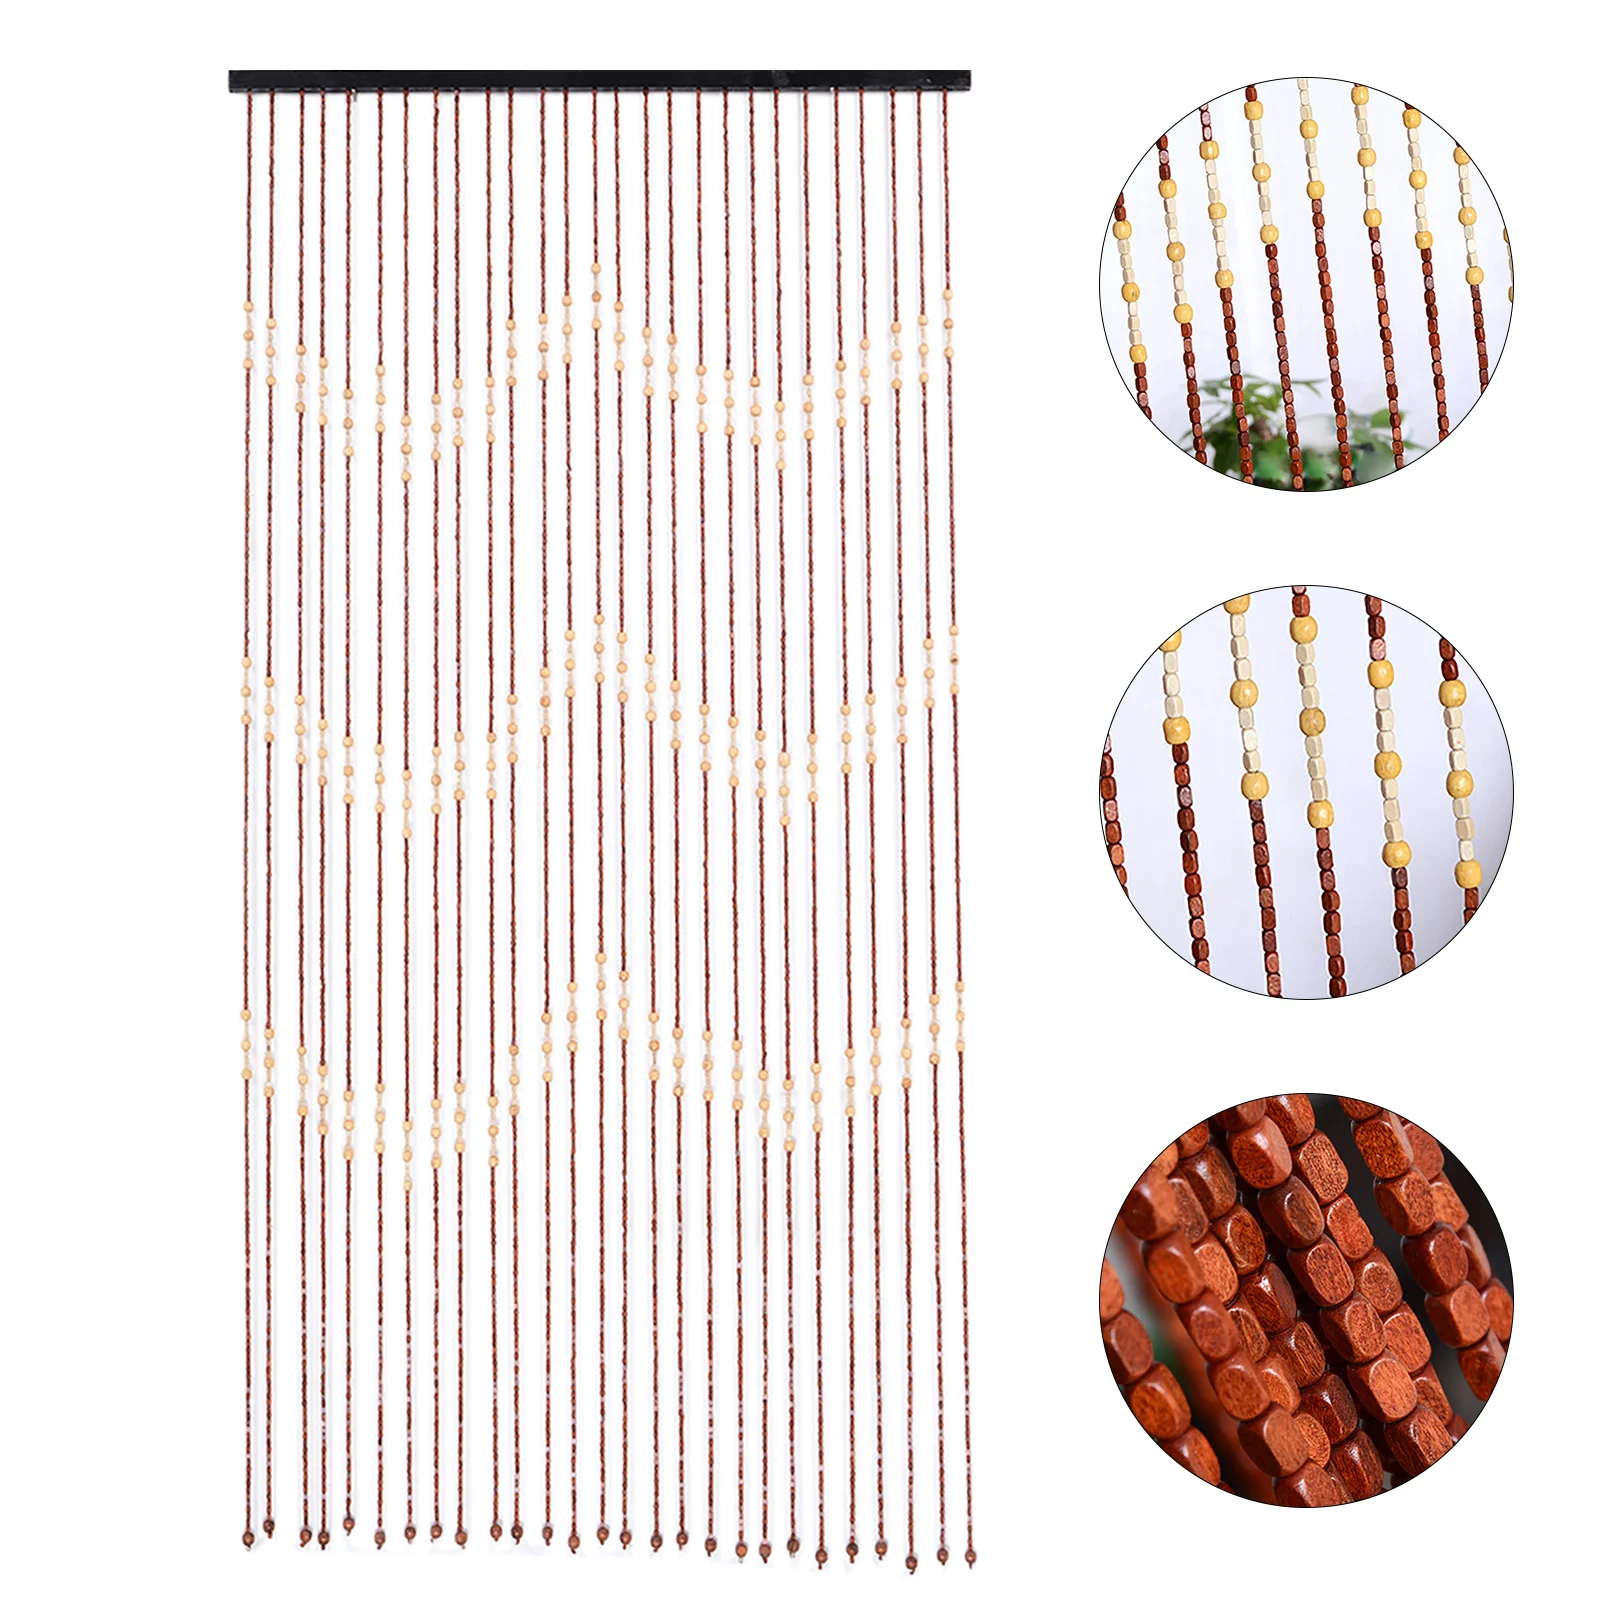 27 Strand Vintage Natural Wood and Bamboo Beaded Curtain Fly Screen for Bath Bedroom Porch Doorway